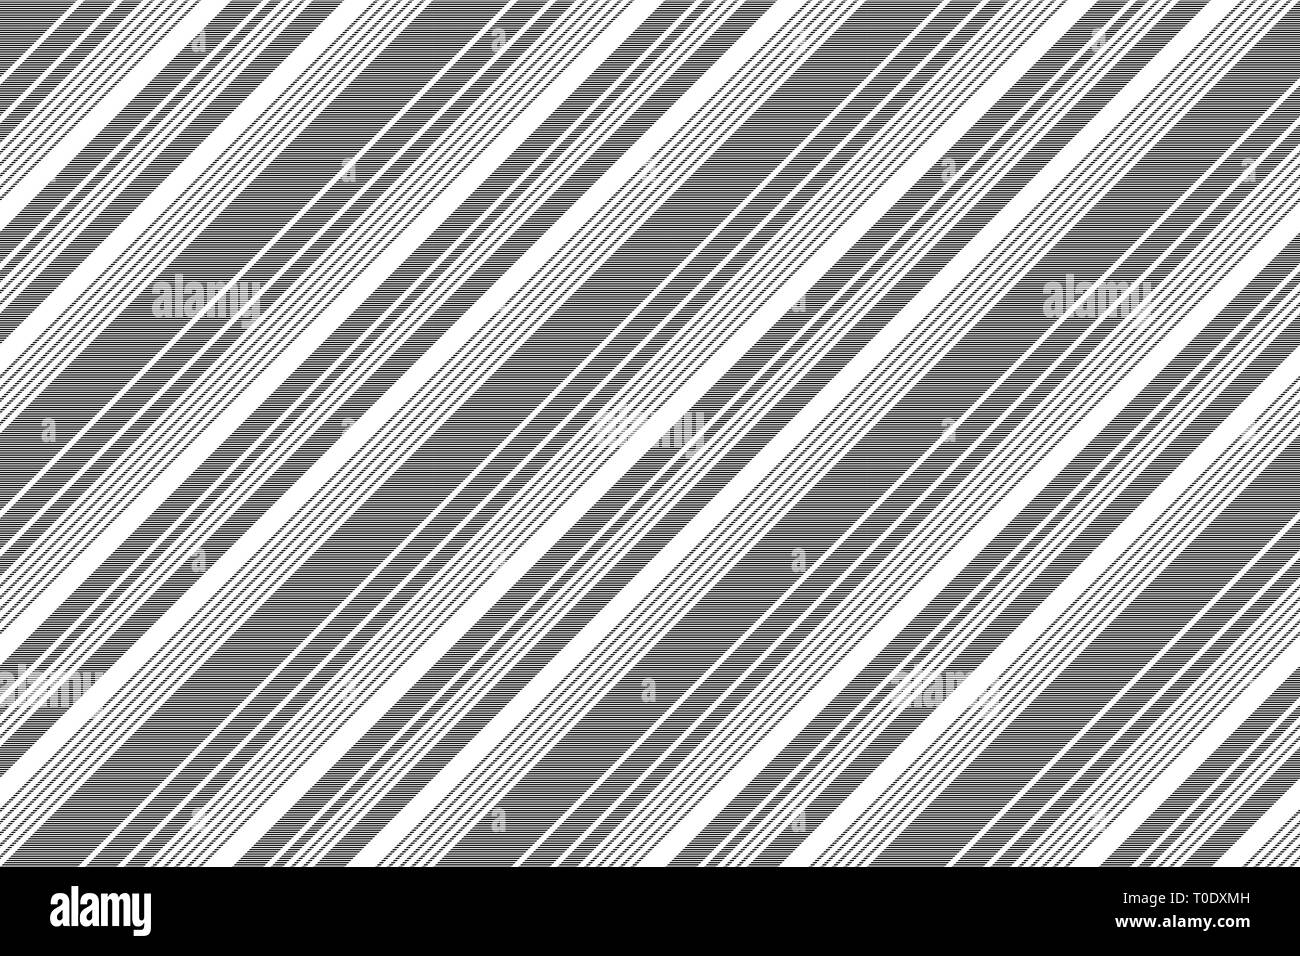 Black white abstract lines seamless pattern. Vector illustration. Stock Vector